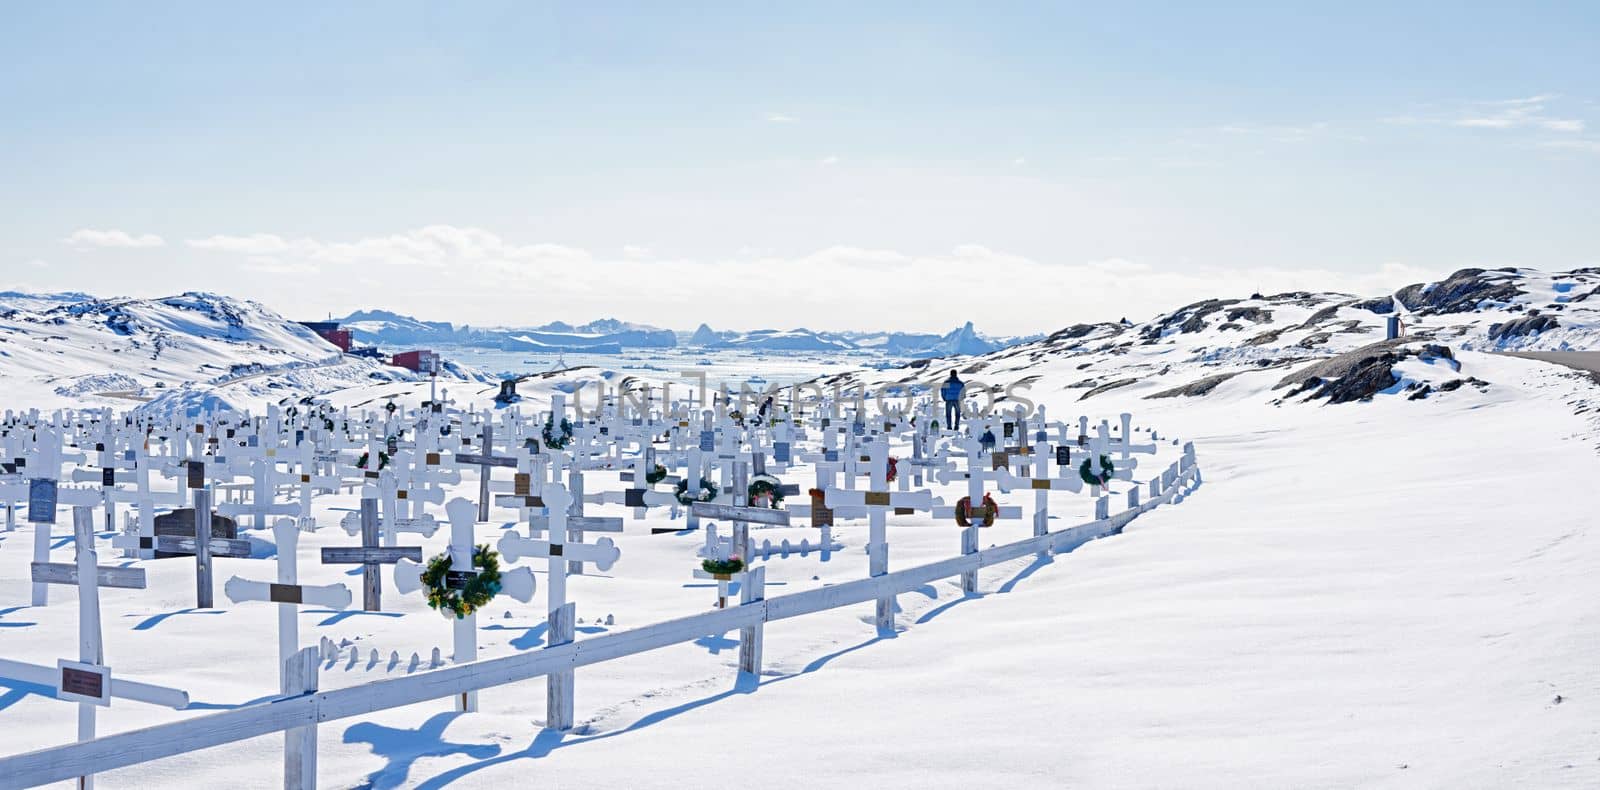 Greenland - beauty of the North. A photo of a churchyard outside Ilulissat, Greenland, DenmarkA photo of a public churchyard outside Ilulissat, Greenland, Denmark. by YuriArcurs